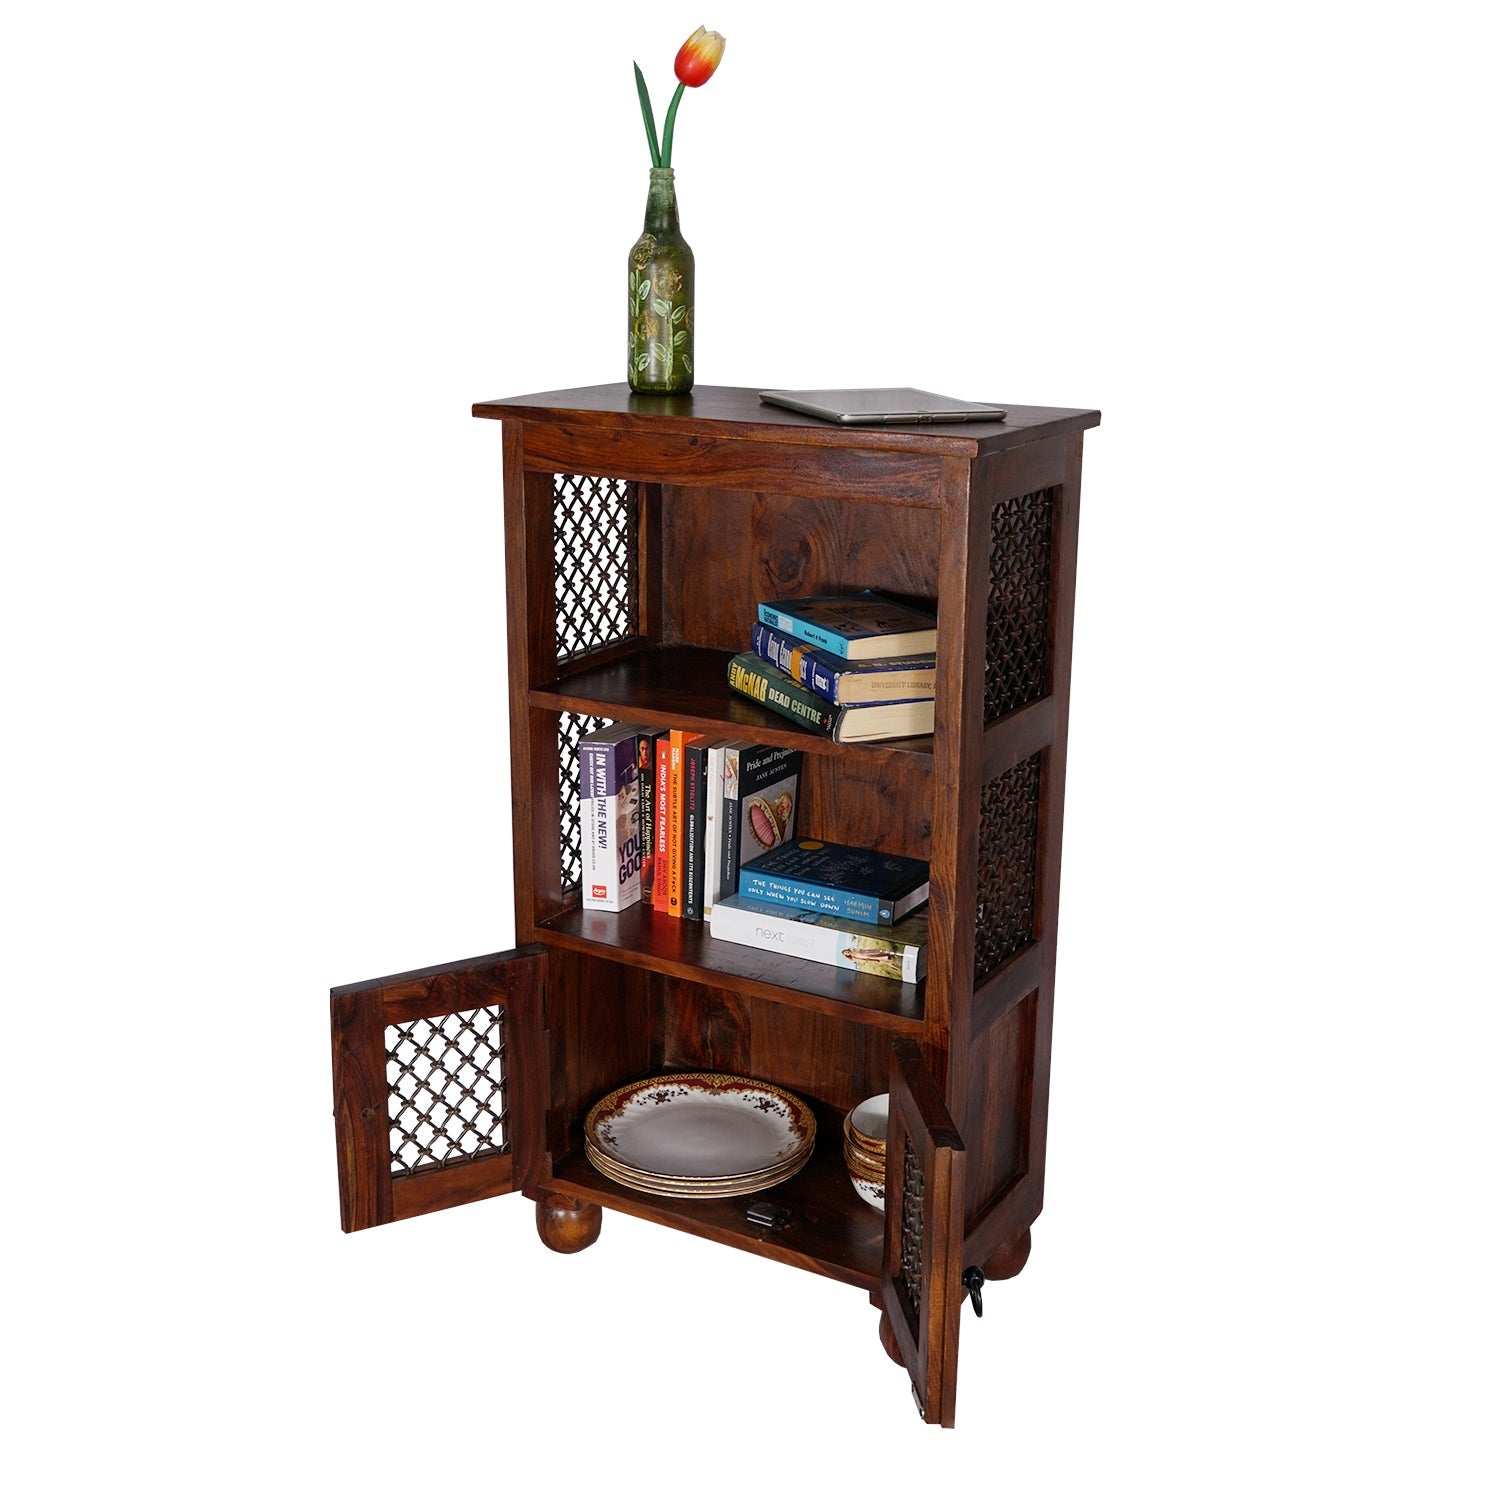 Handmade Wooden Storage Display Unit with Jali Cabinet - 2-Tier - Stylla London